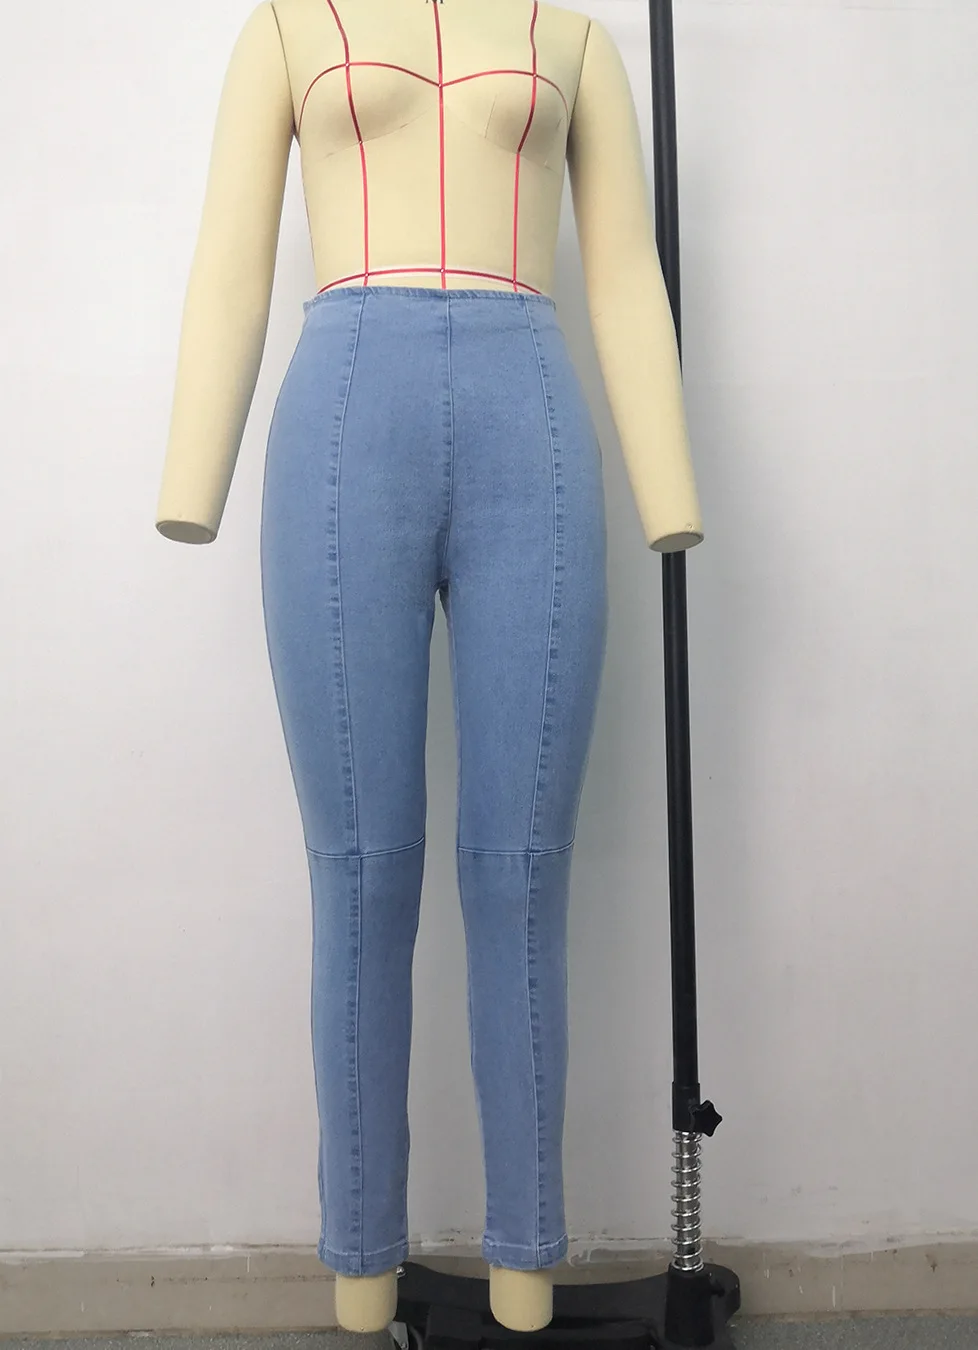 
PT7099 Ready to ship stretchy jeans women fall clothing for female slim-fit and high waist ladies jeans pants 